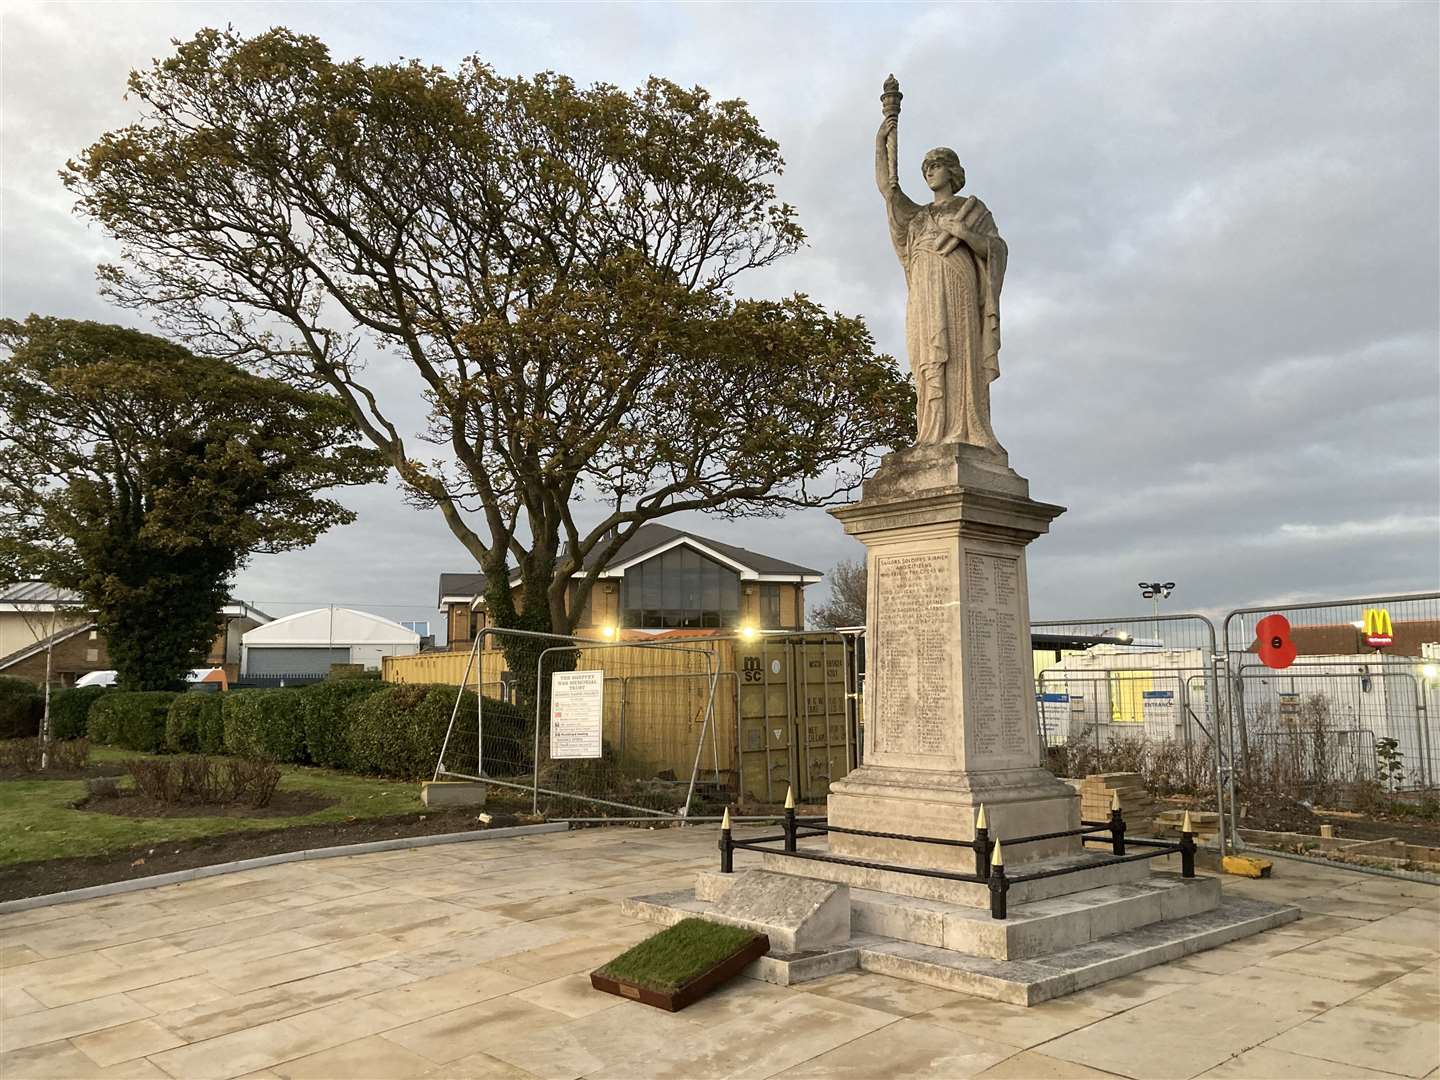 Sheerness war memorial with new surround. A new memorial wall is being built behind it for its 100th anniversary